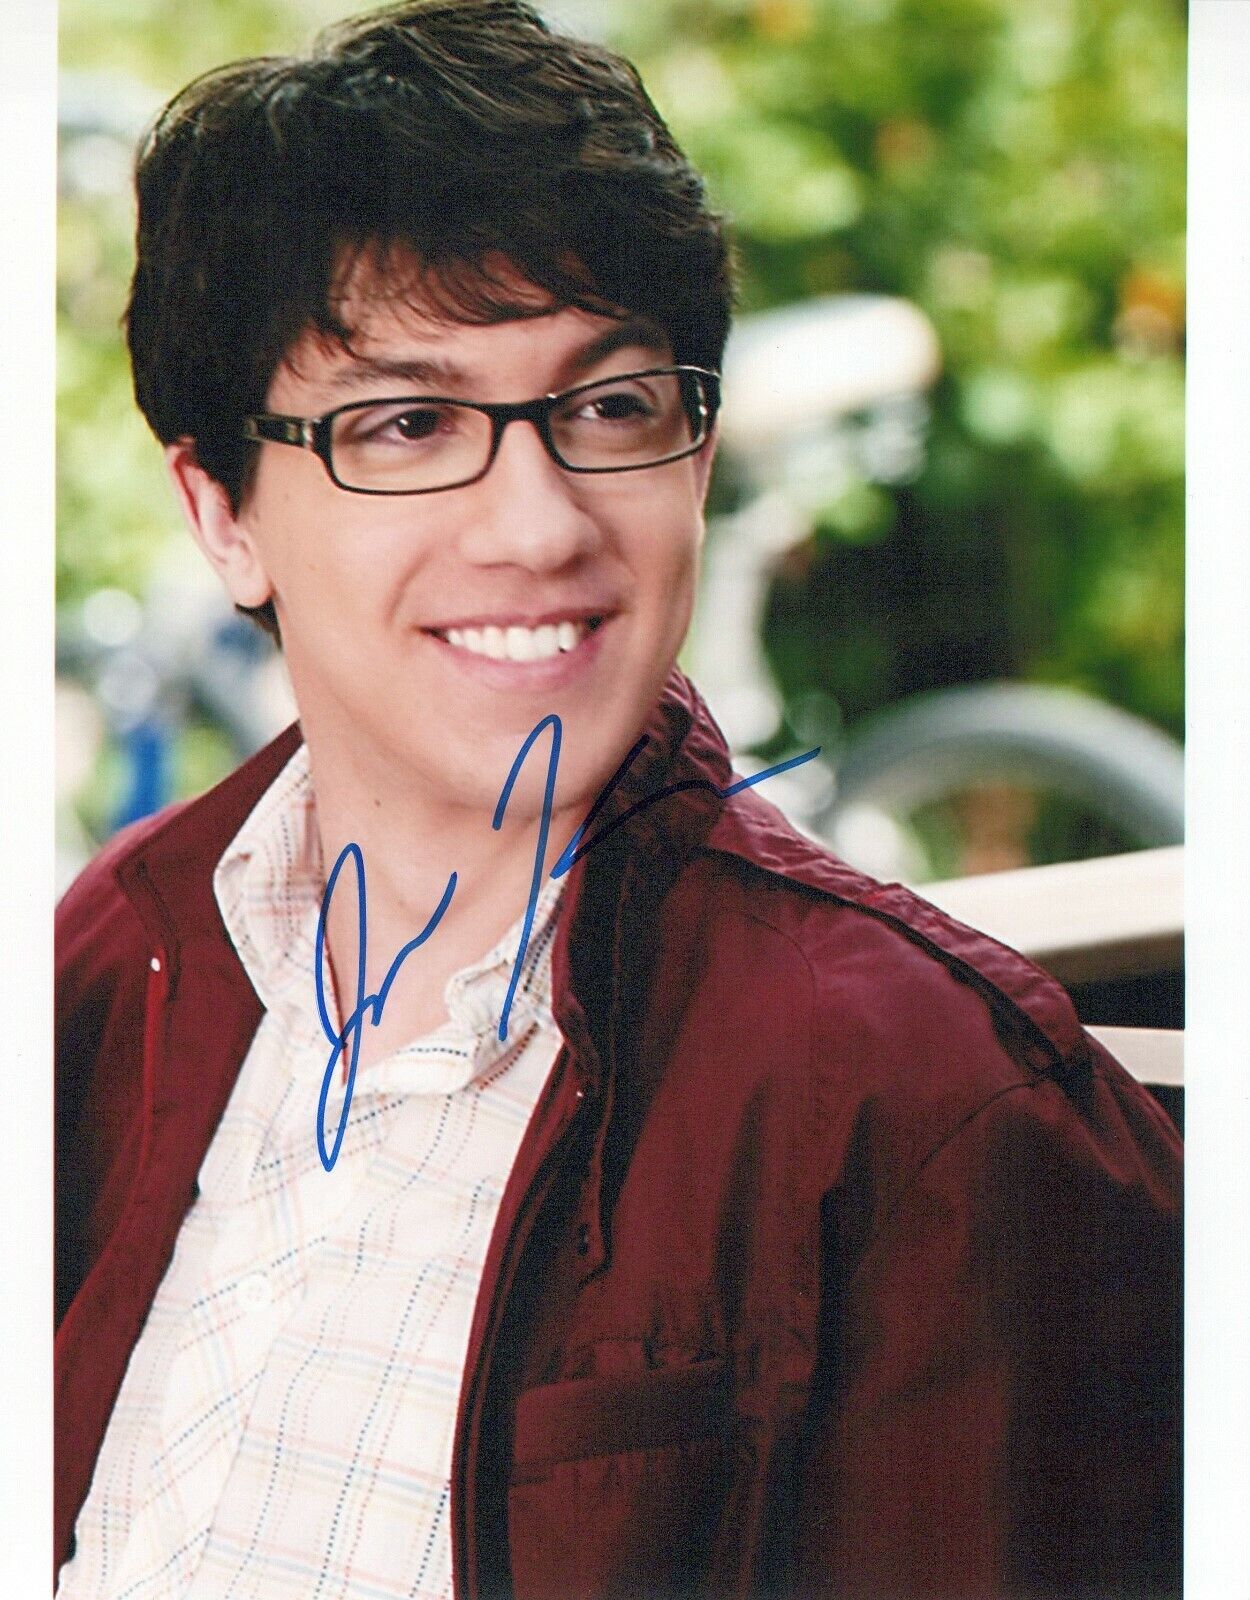 Jared Kusnitz Prom autographed Photo Poster painting signed 8x10 #1 Justin Wexler